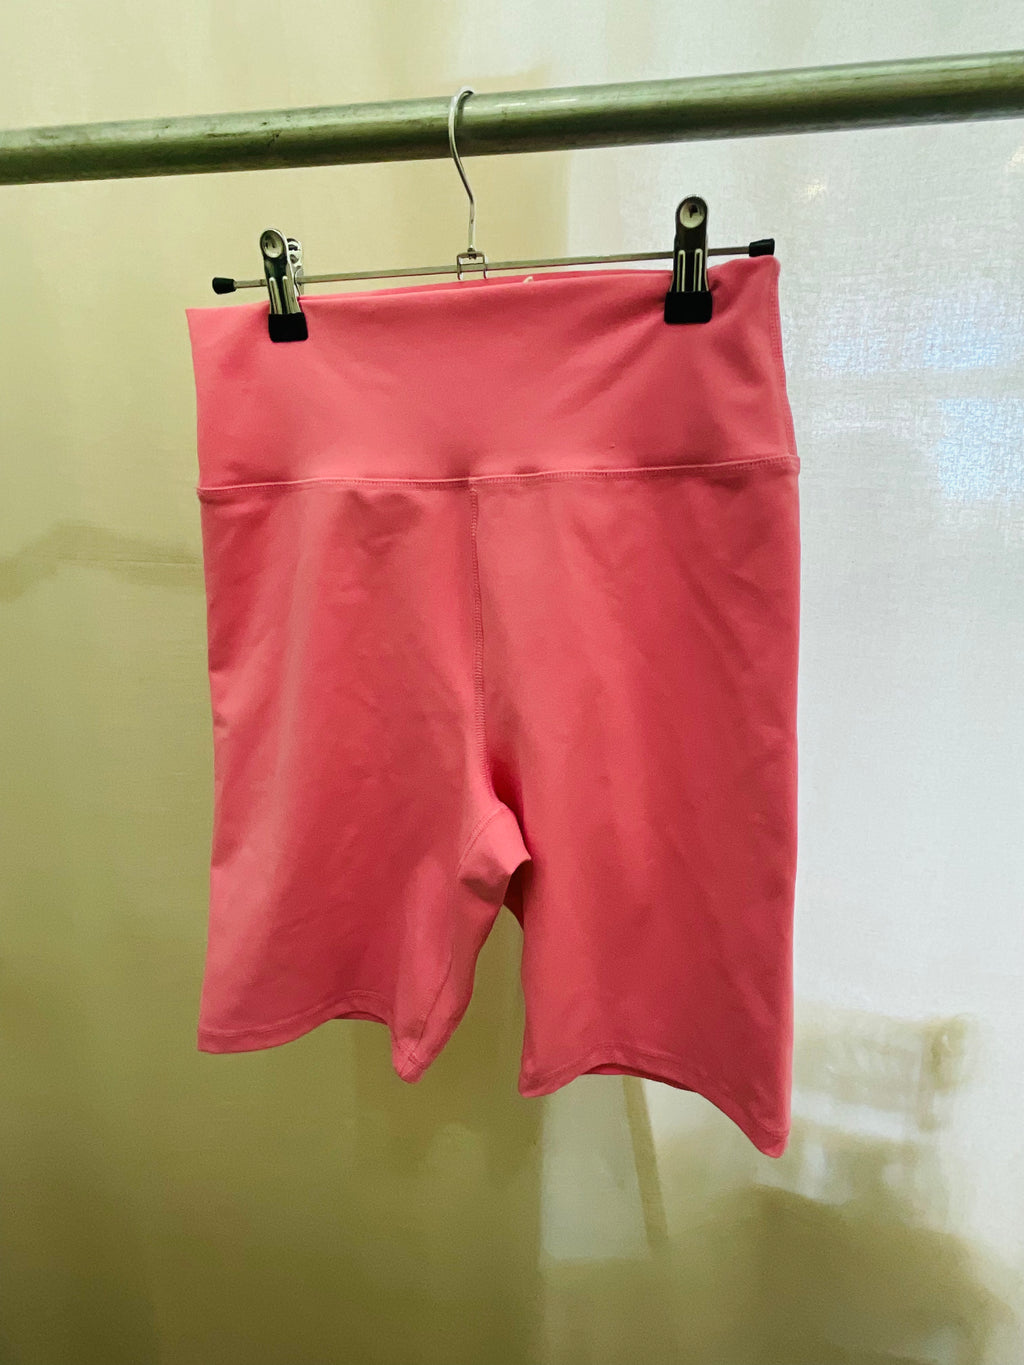 Country Road Pink Exercise Shorts Sz S